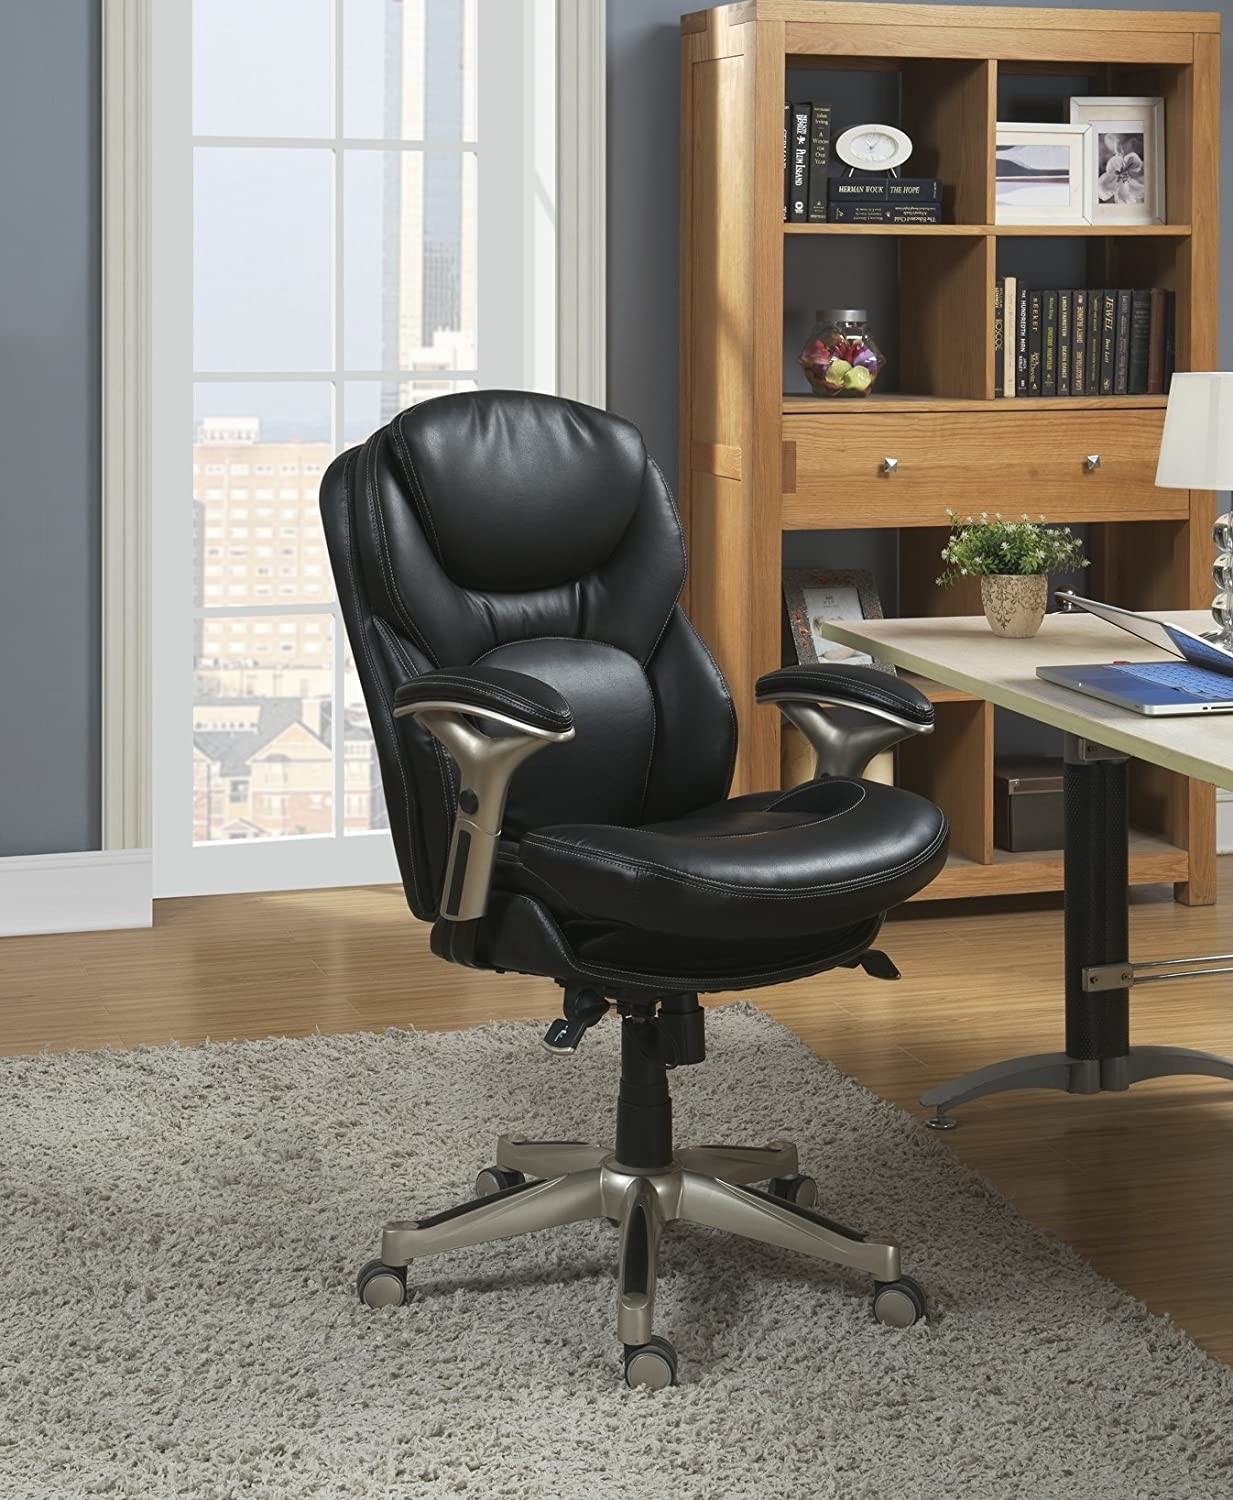 Best orthopedic office chairs oprthopedic office chair 4